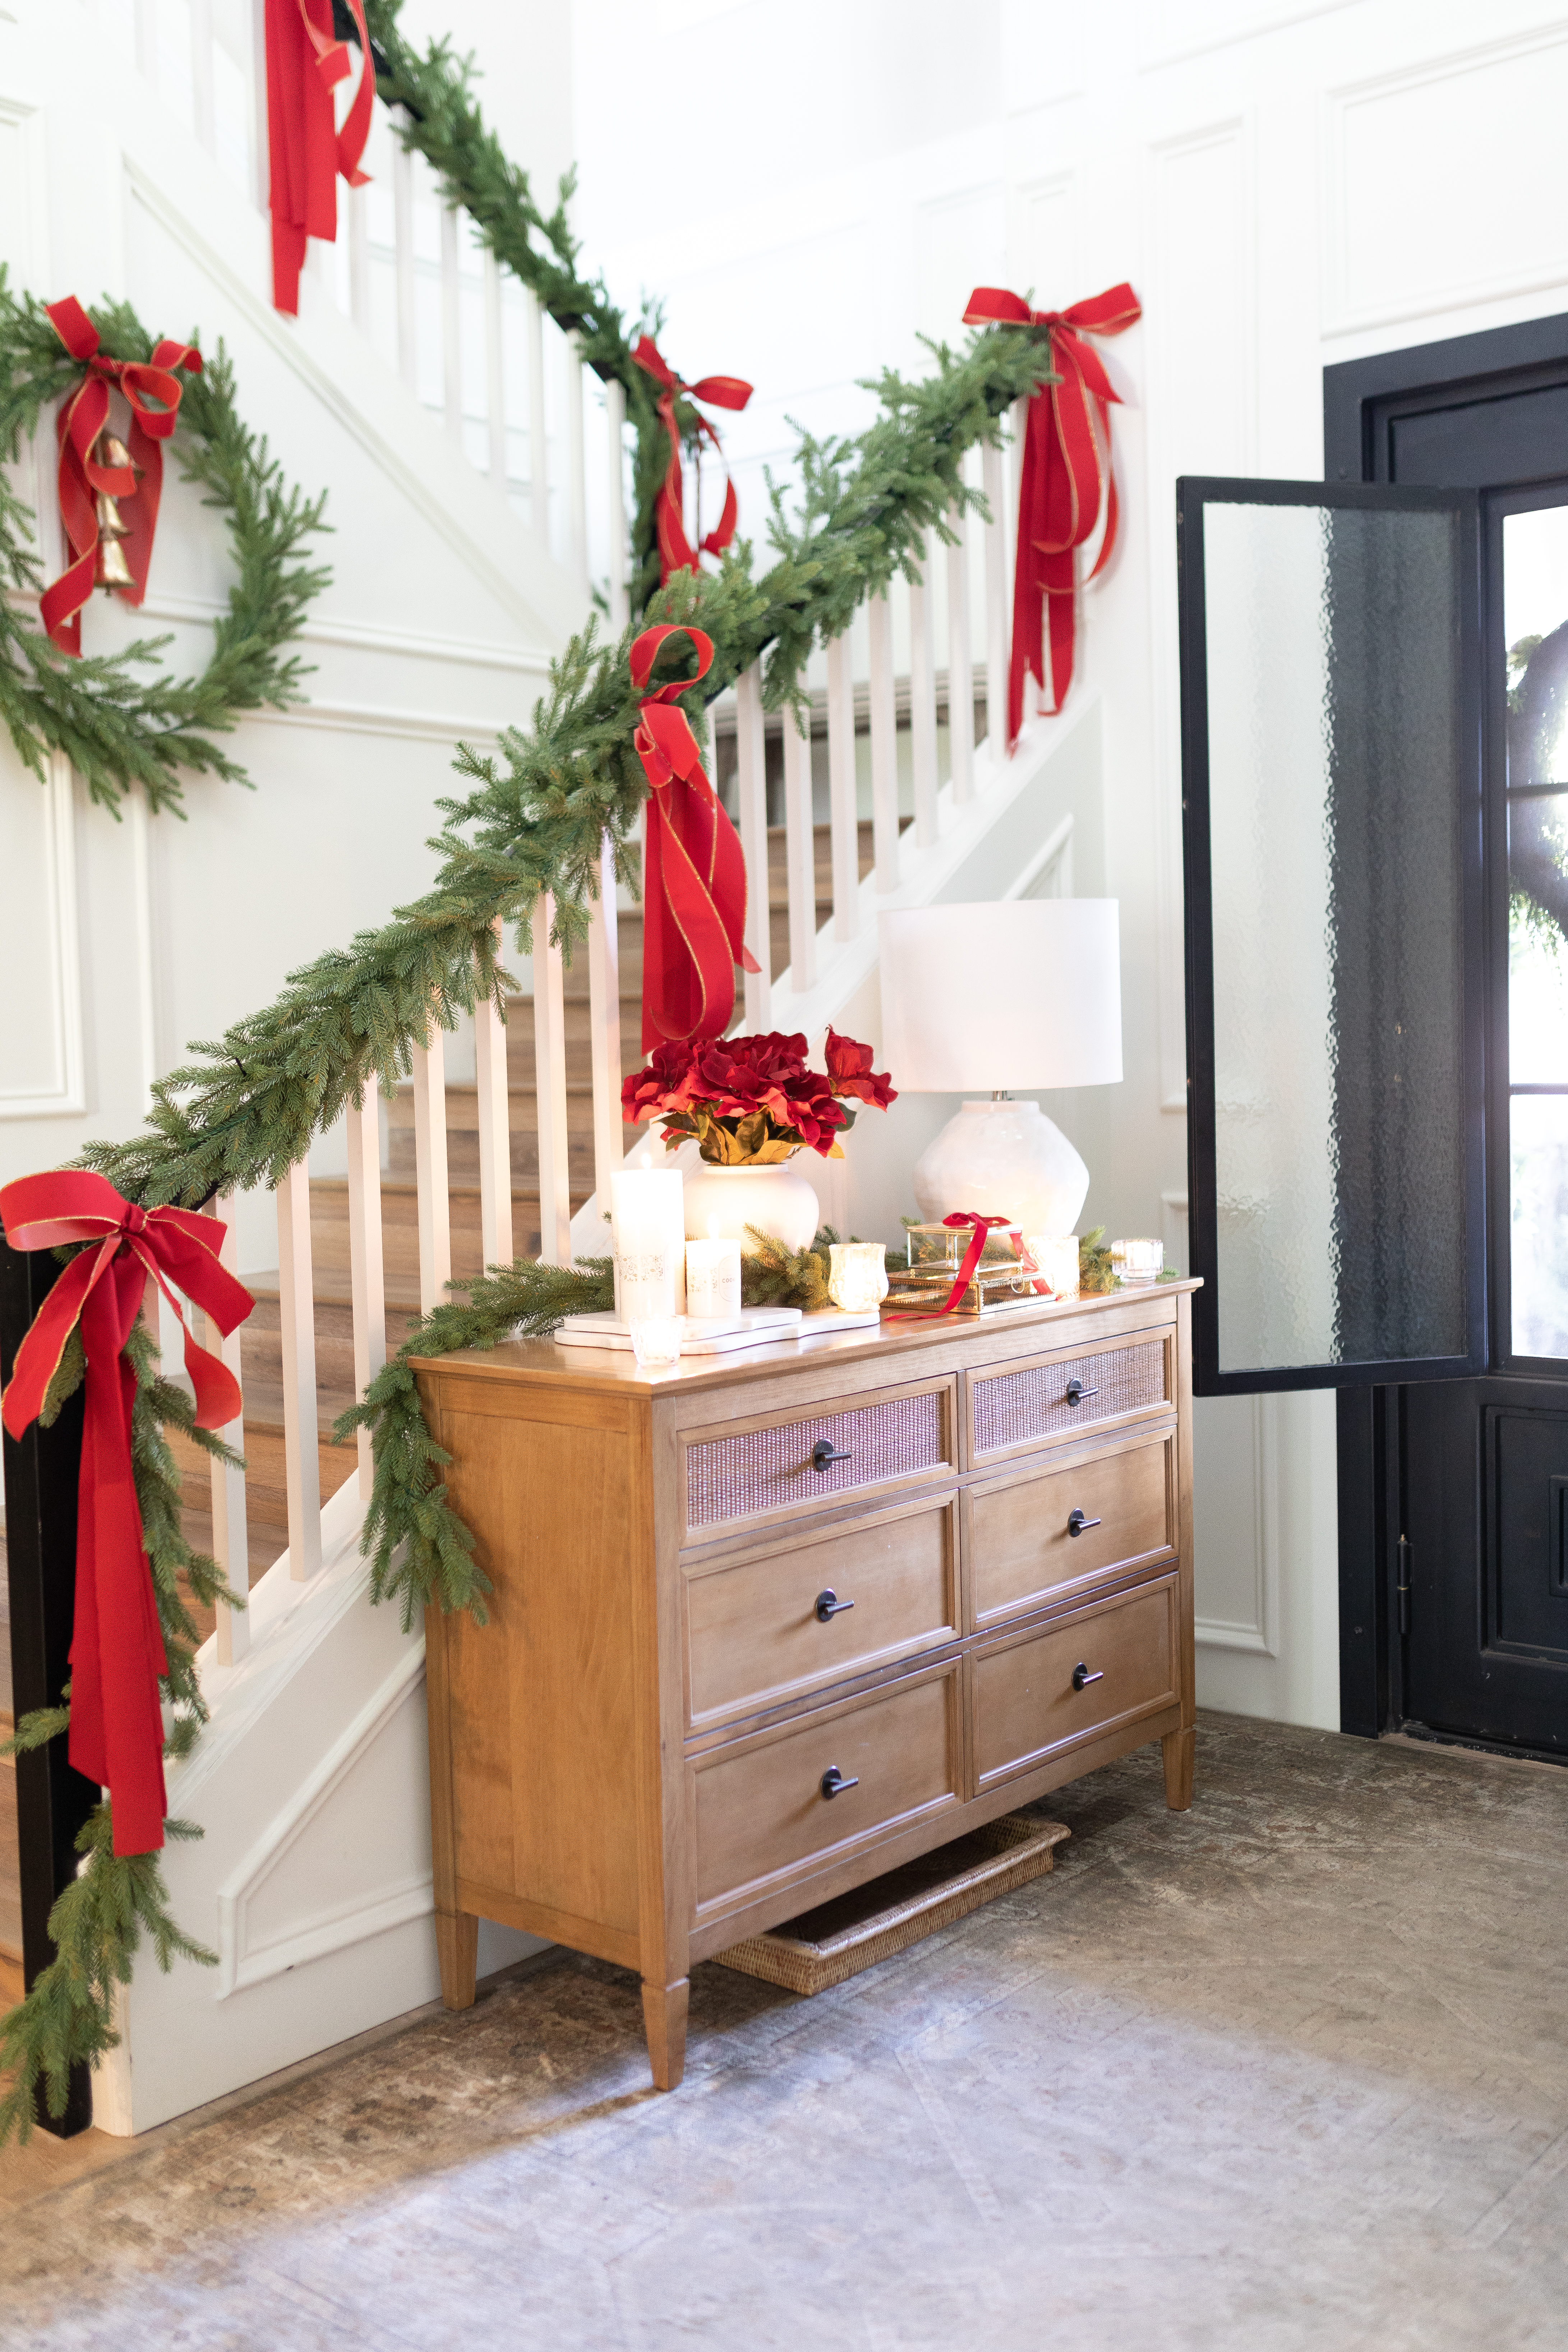 Red Christmas Decor in a festive entryway. Decorations are also green. THere is a black iron door with a neutral rug.